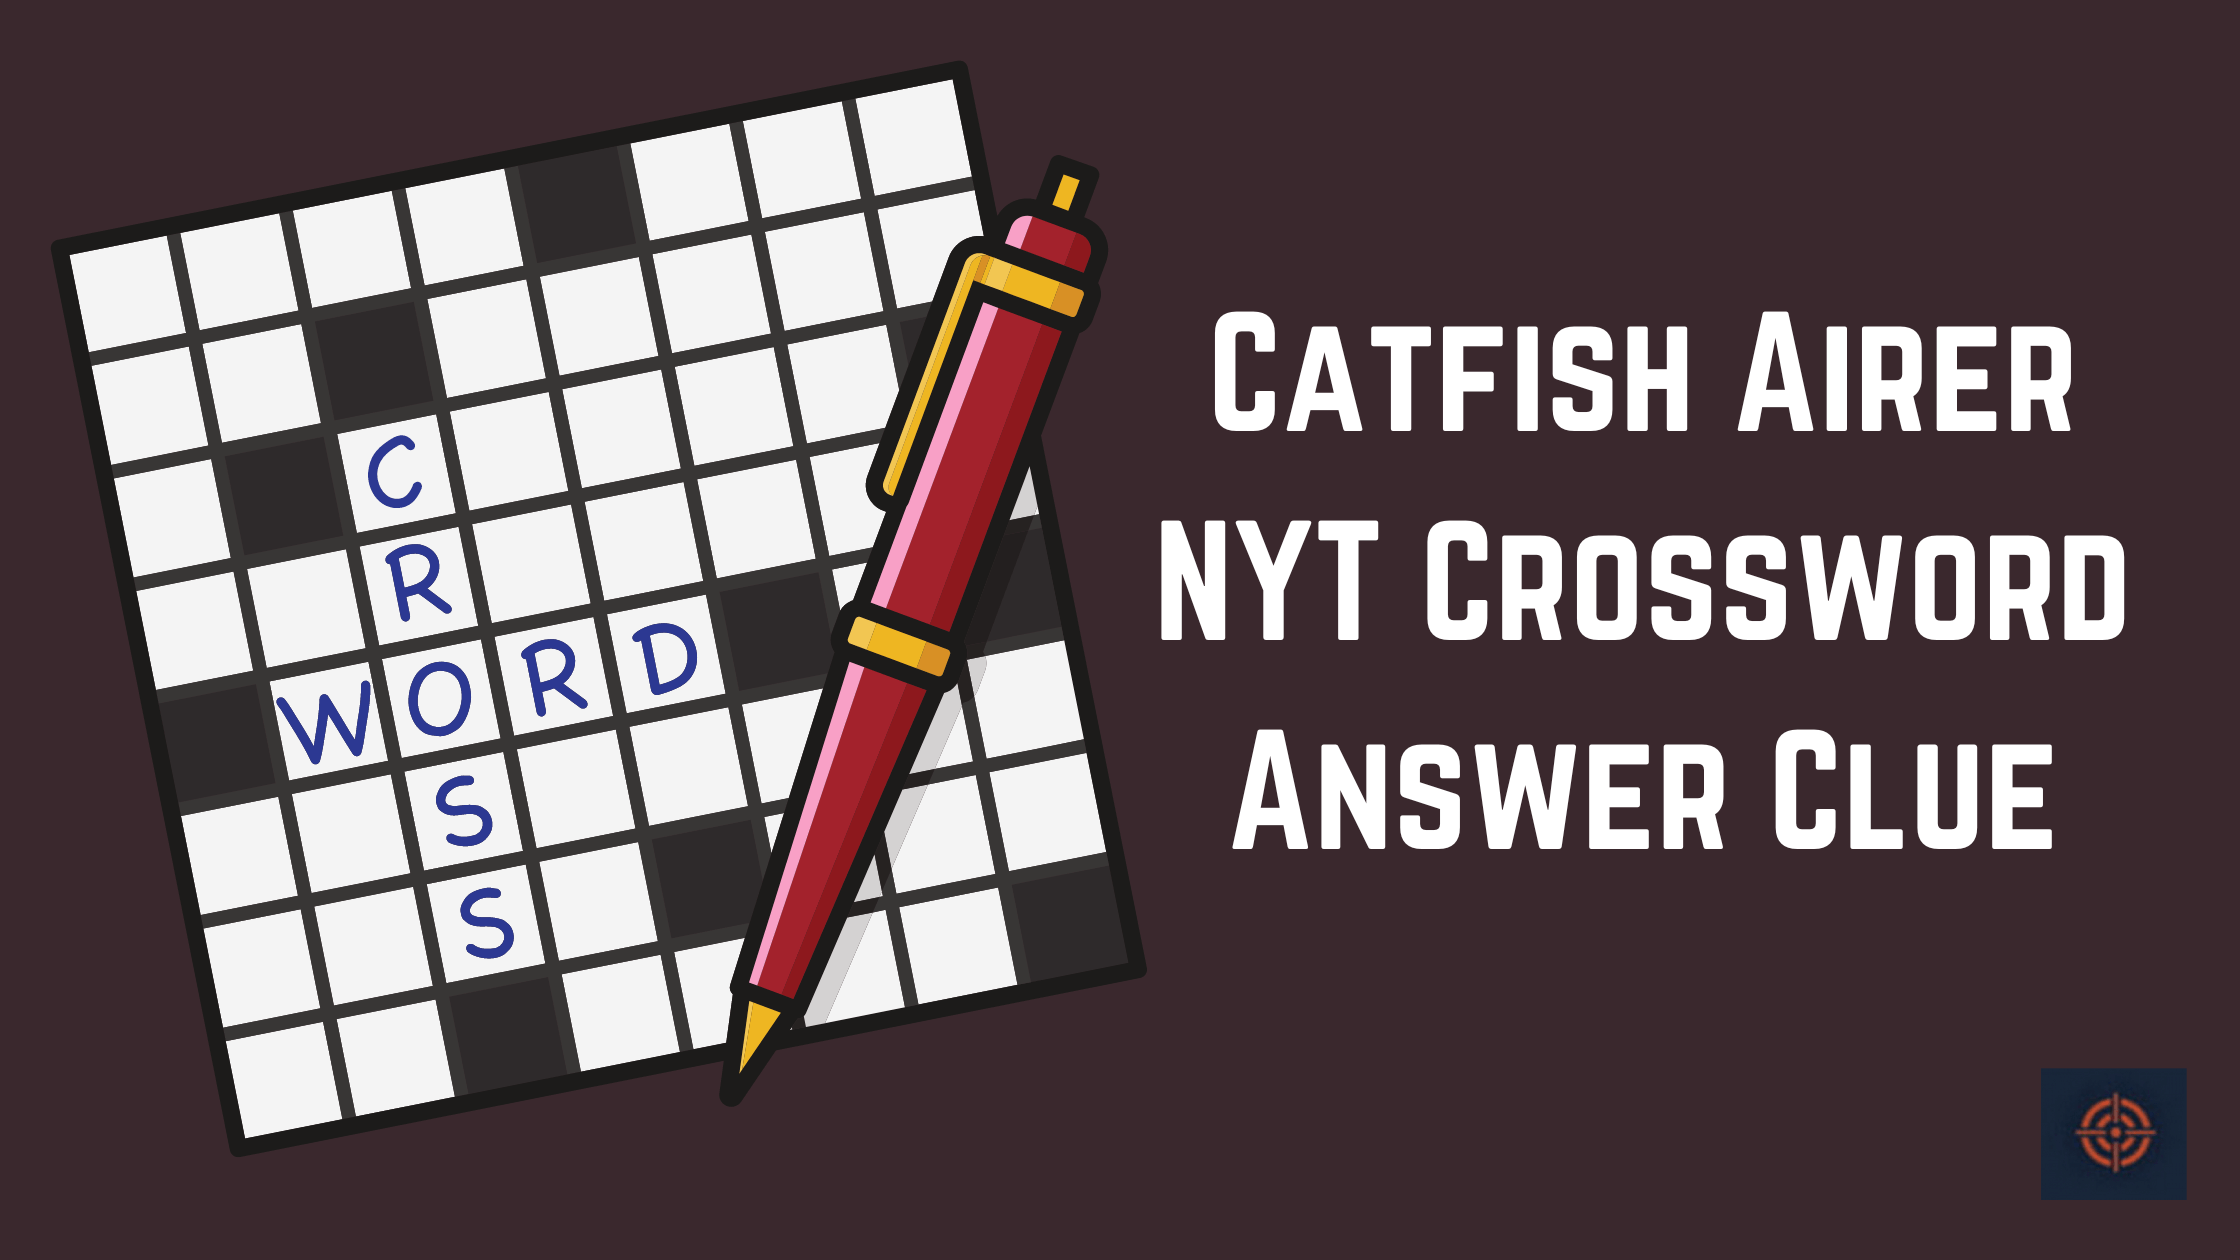 Catfish Airer NYT Crossword Answer